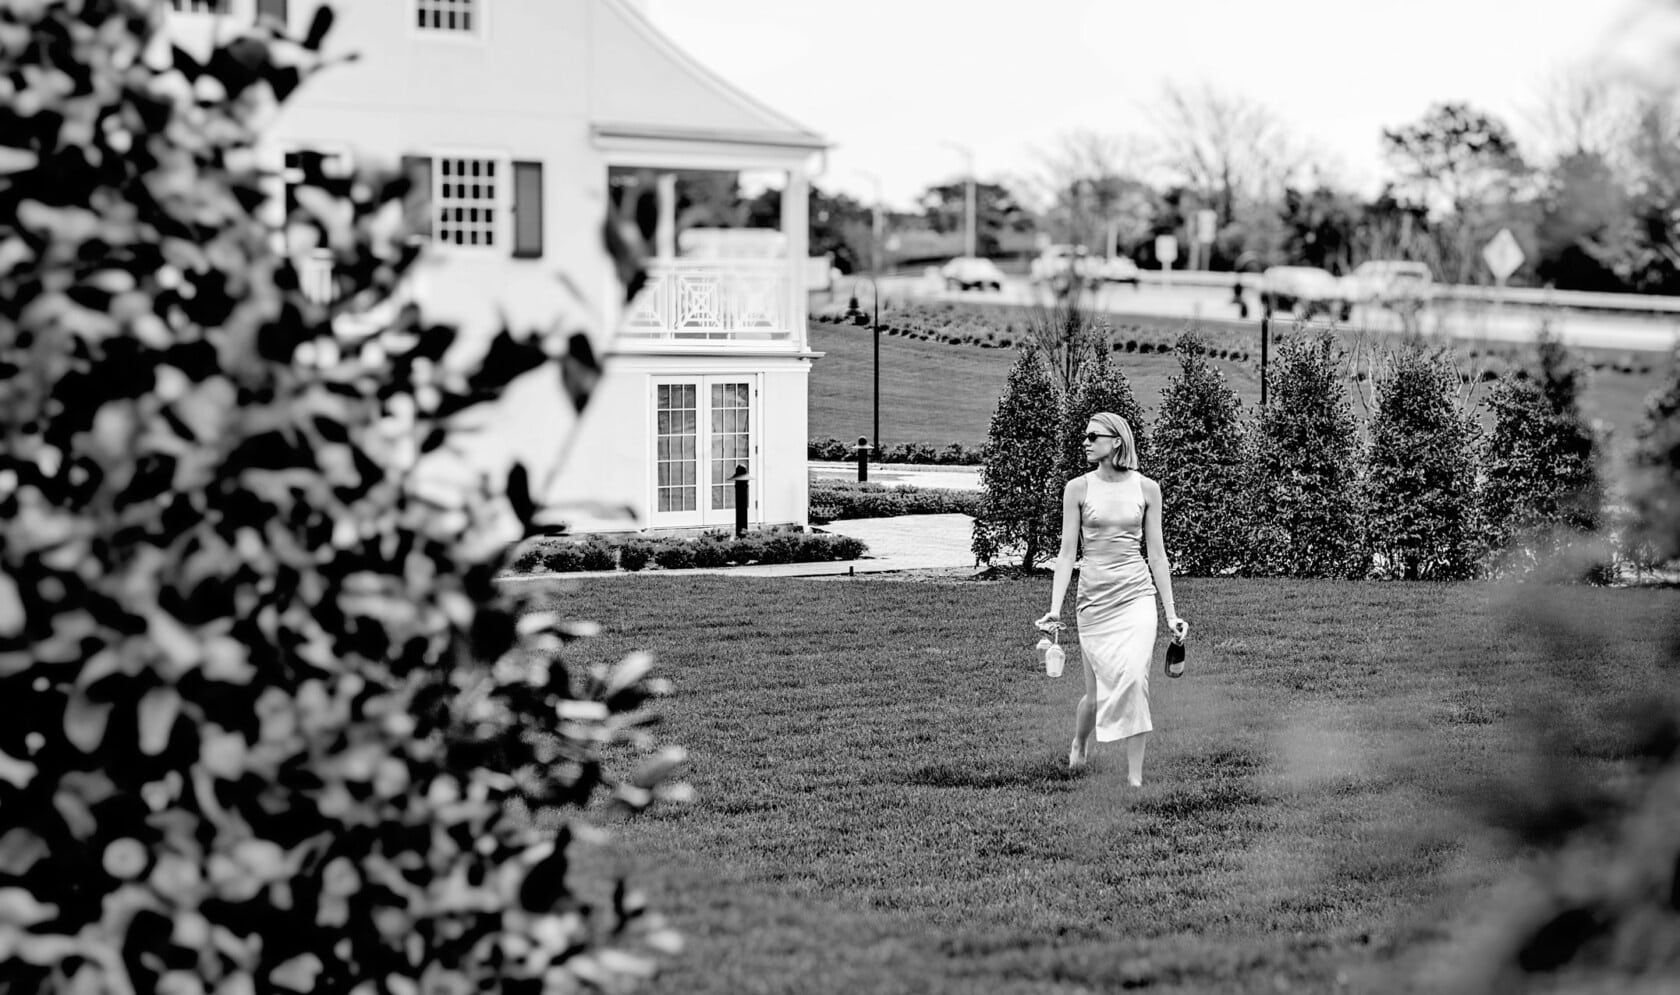 Black and white image of woman crossing garden lawn with historic Canoe Place Inn in the distance.